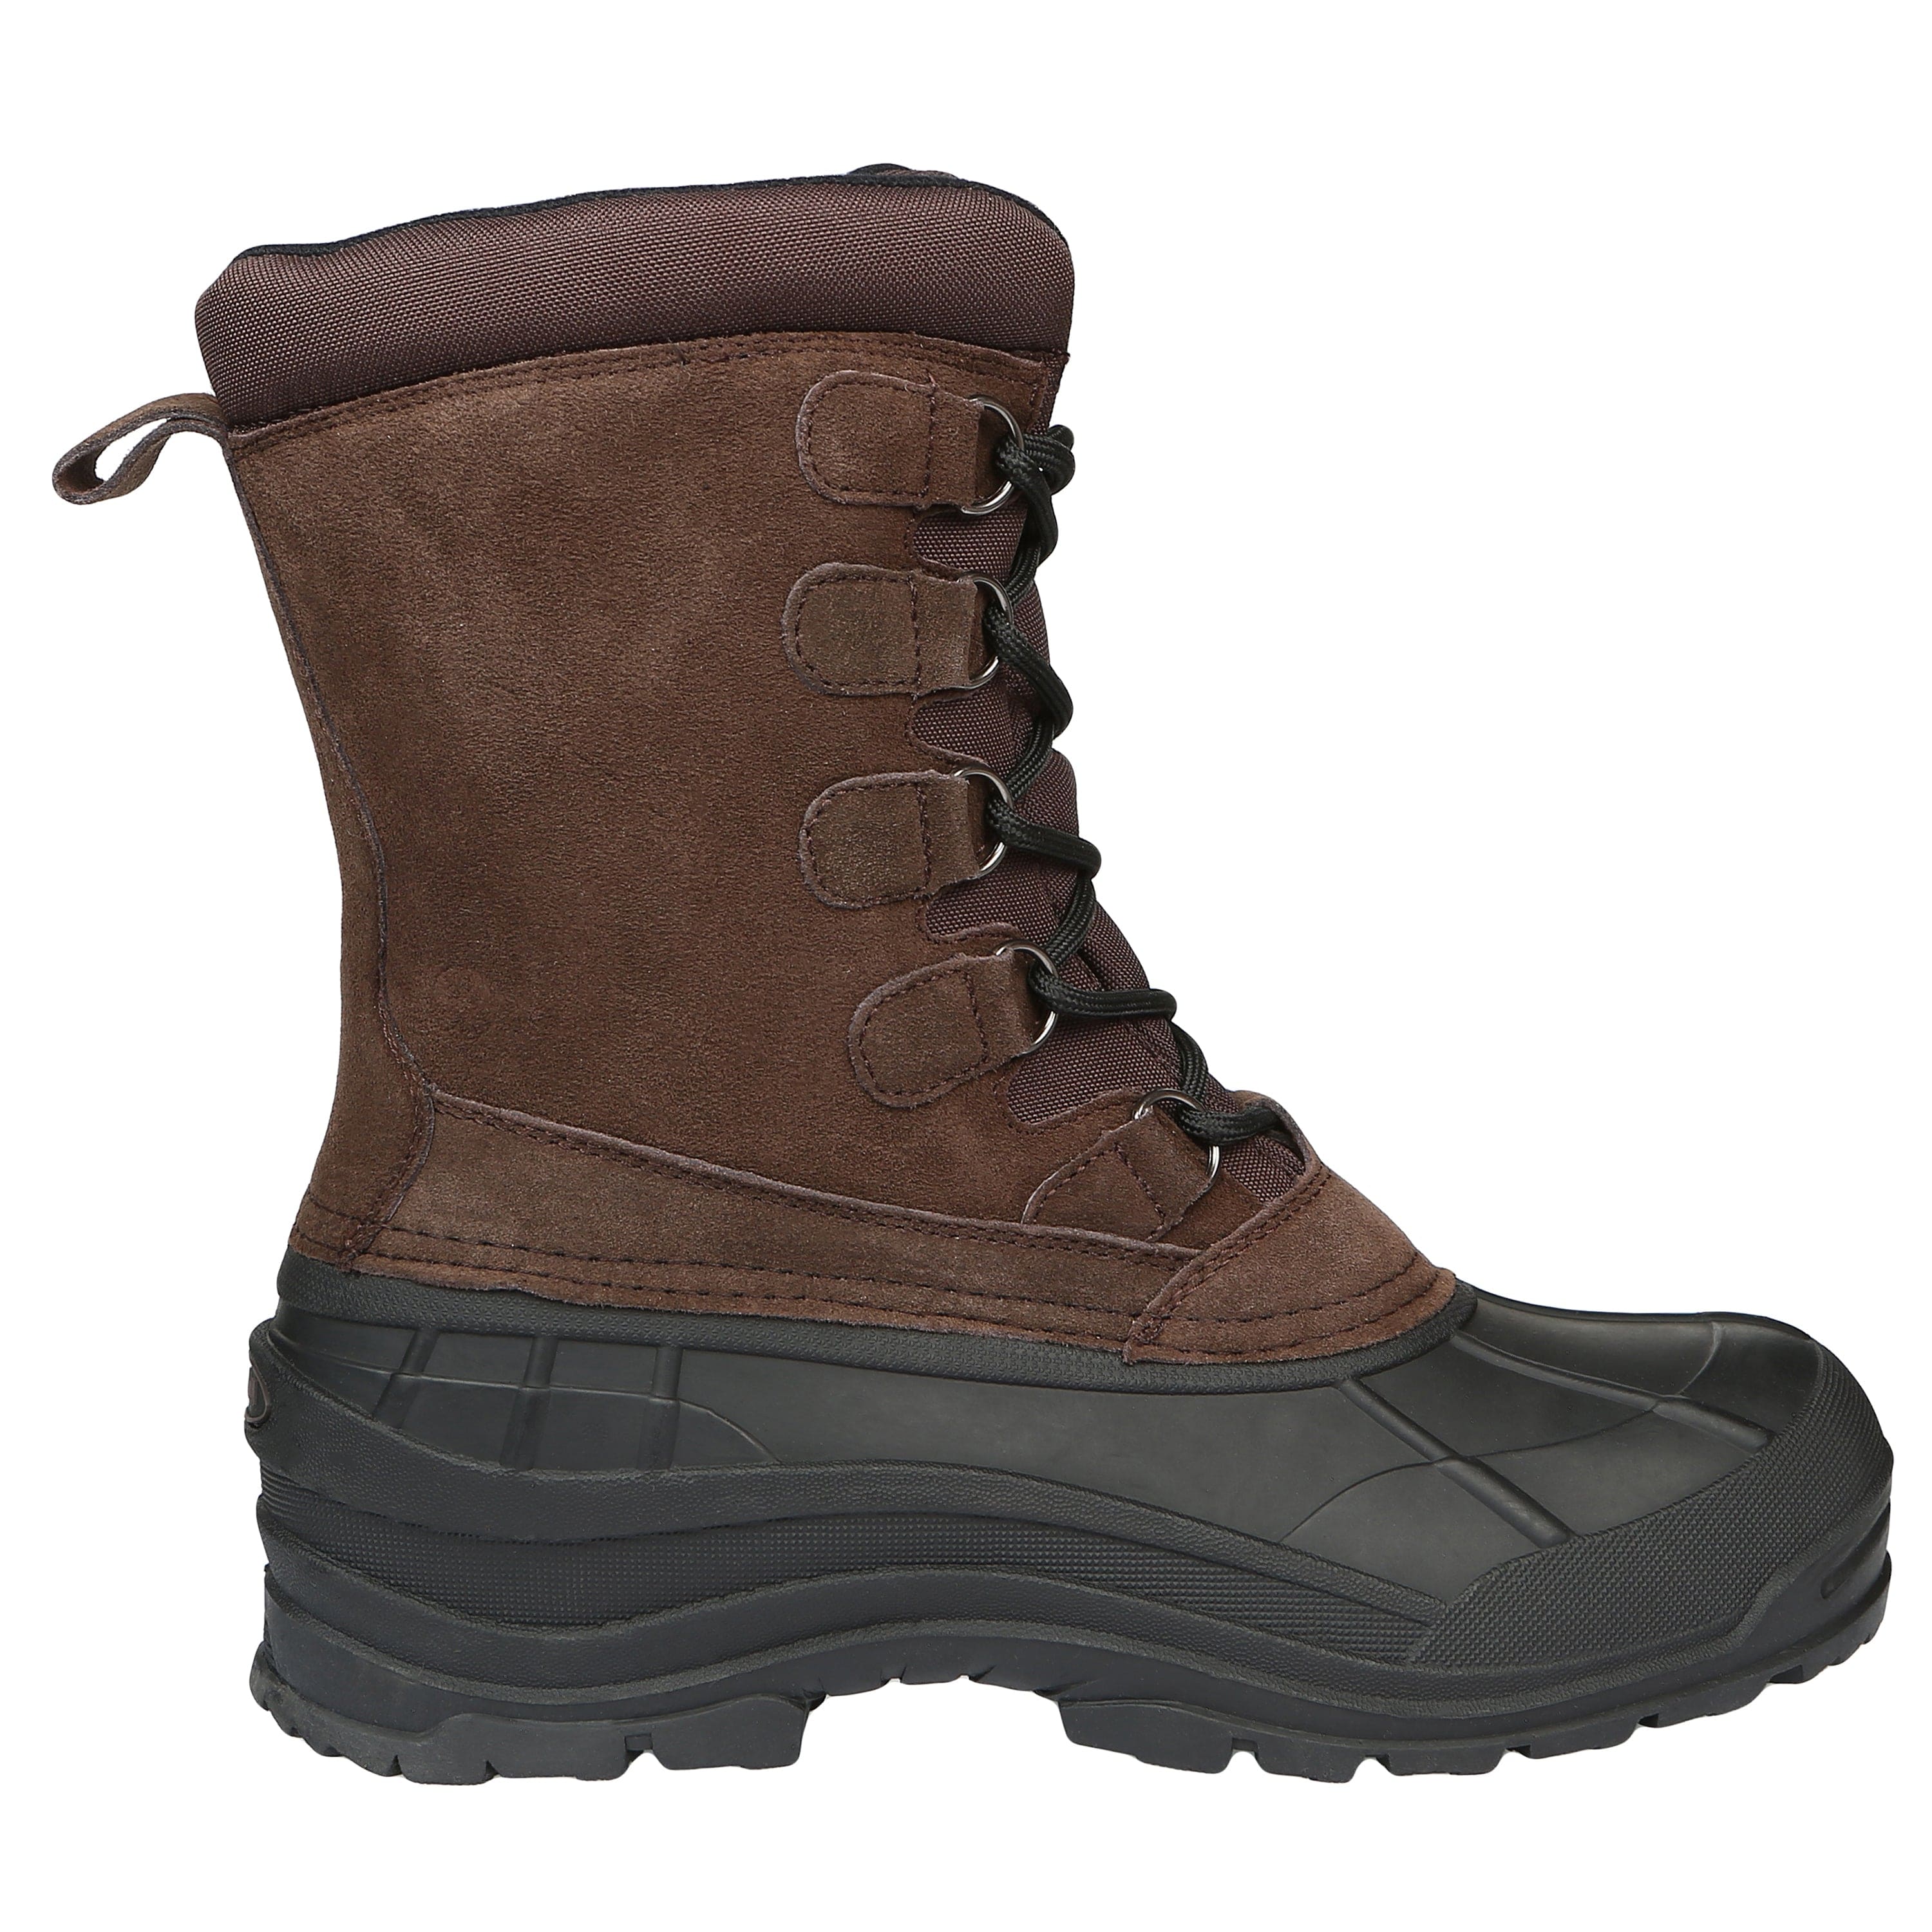 Men's Timber Crest Insulated Winter Snow Boot - Northside USA